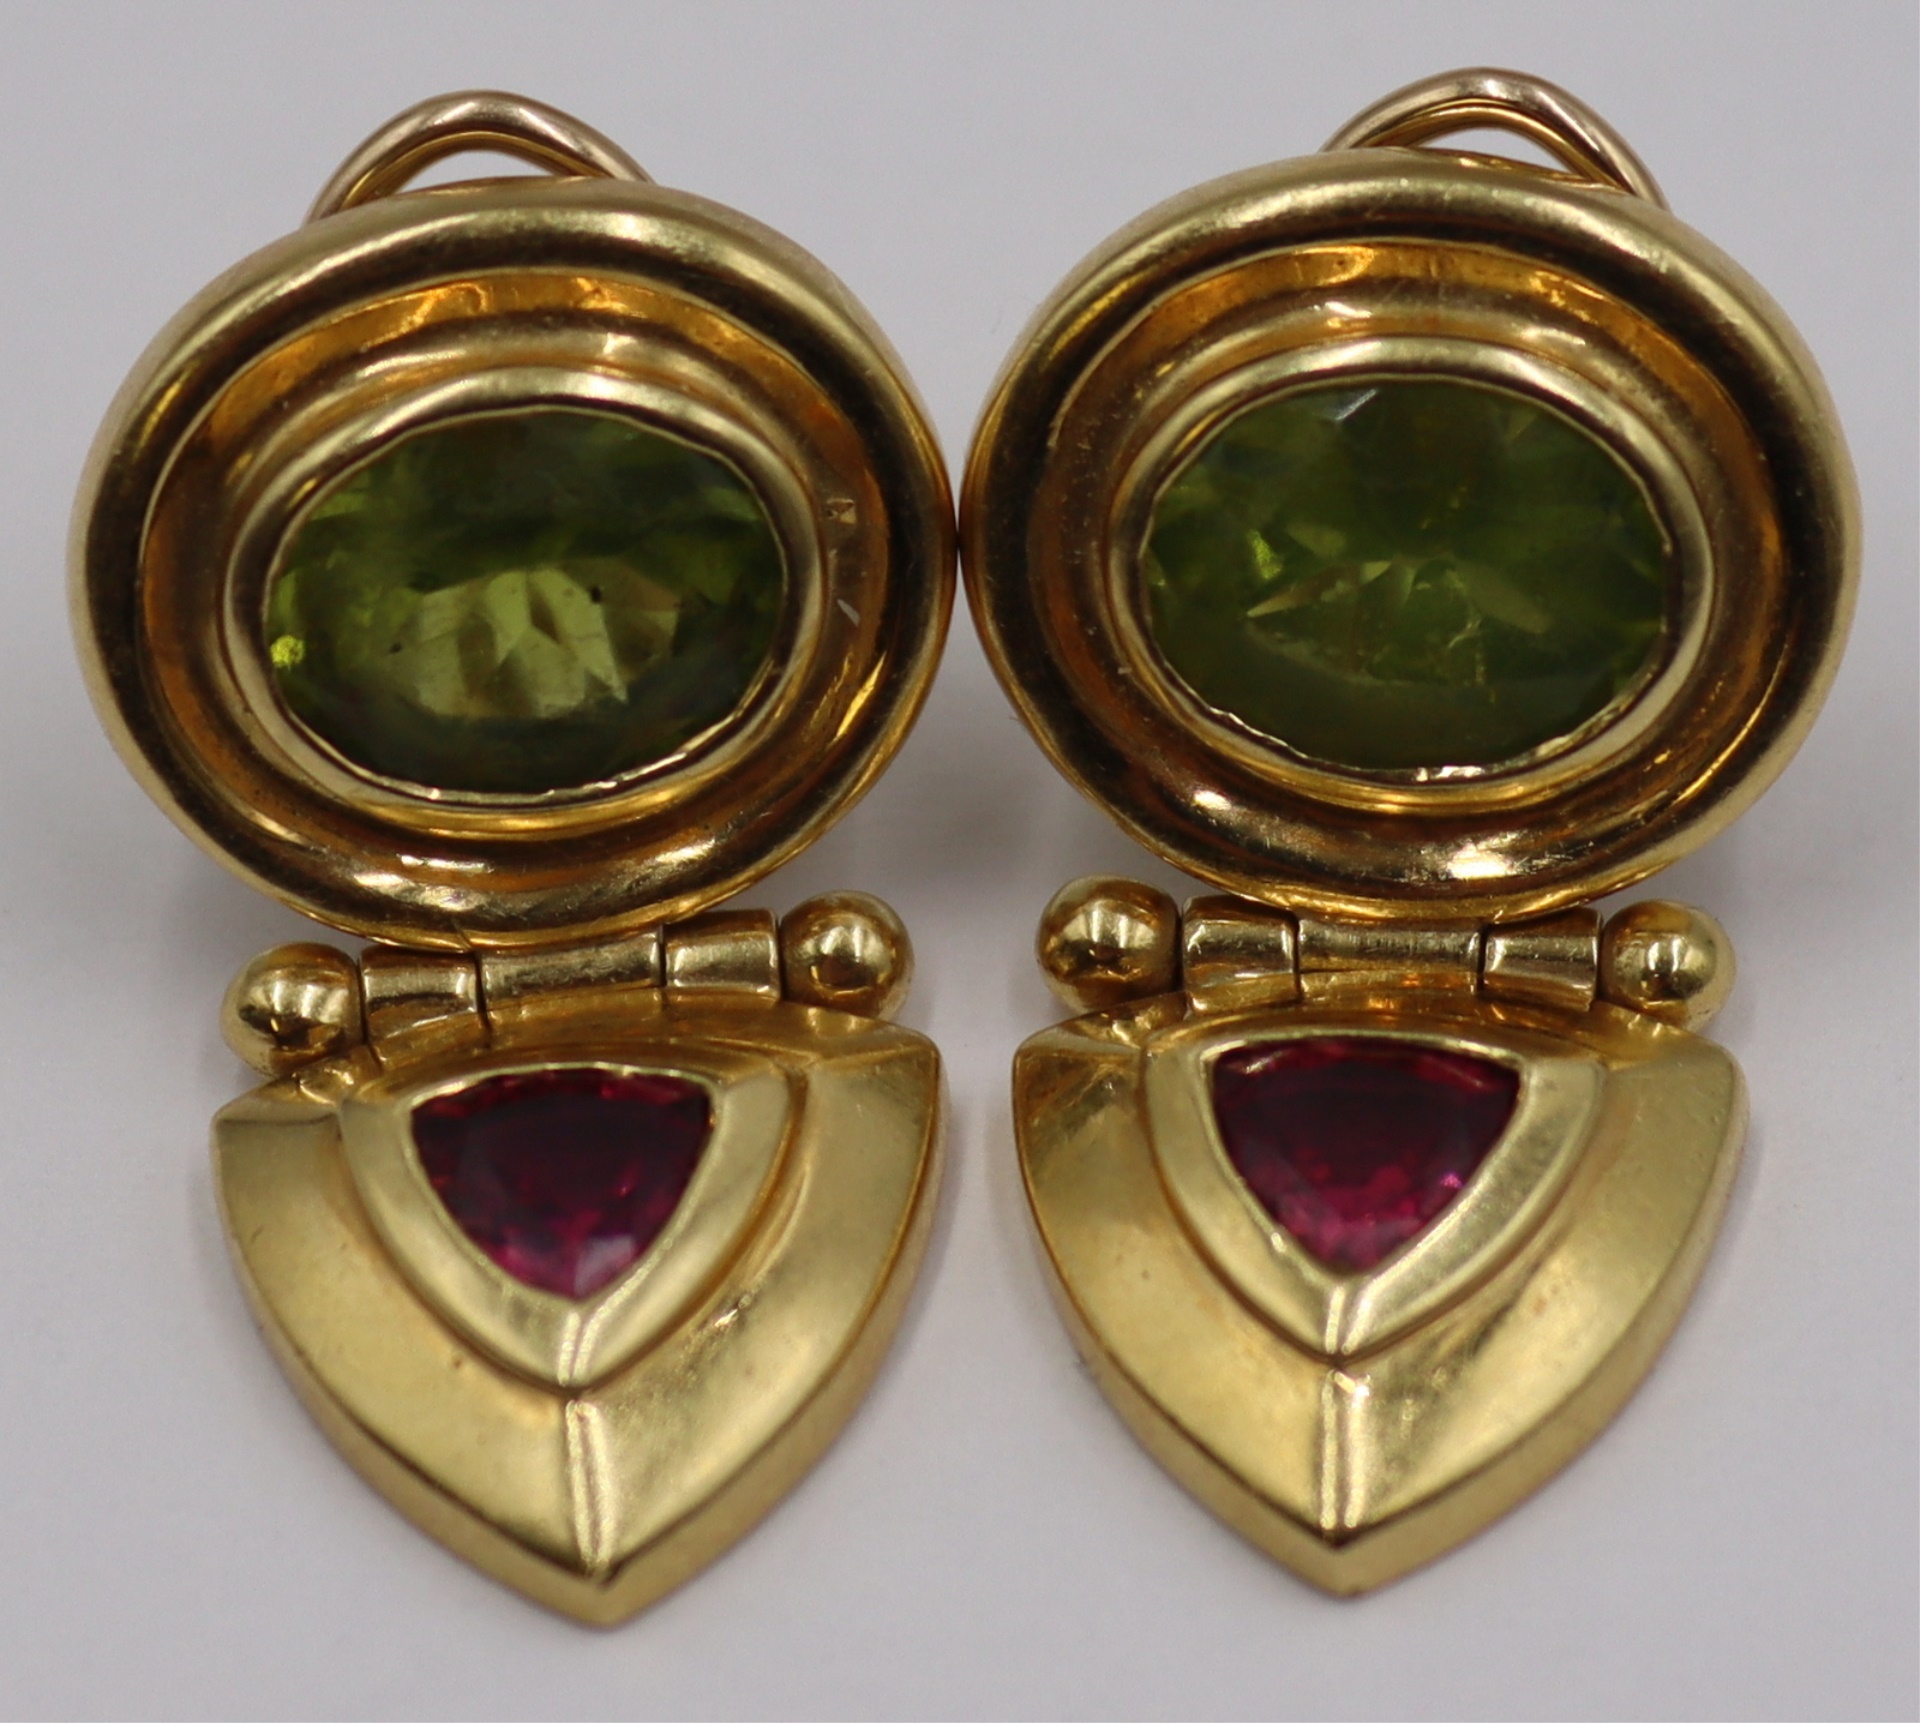 JEWELRY. PAIR OF 14KT GOLD AND